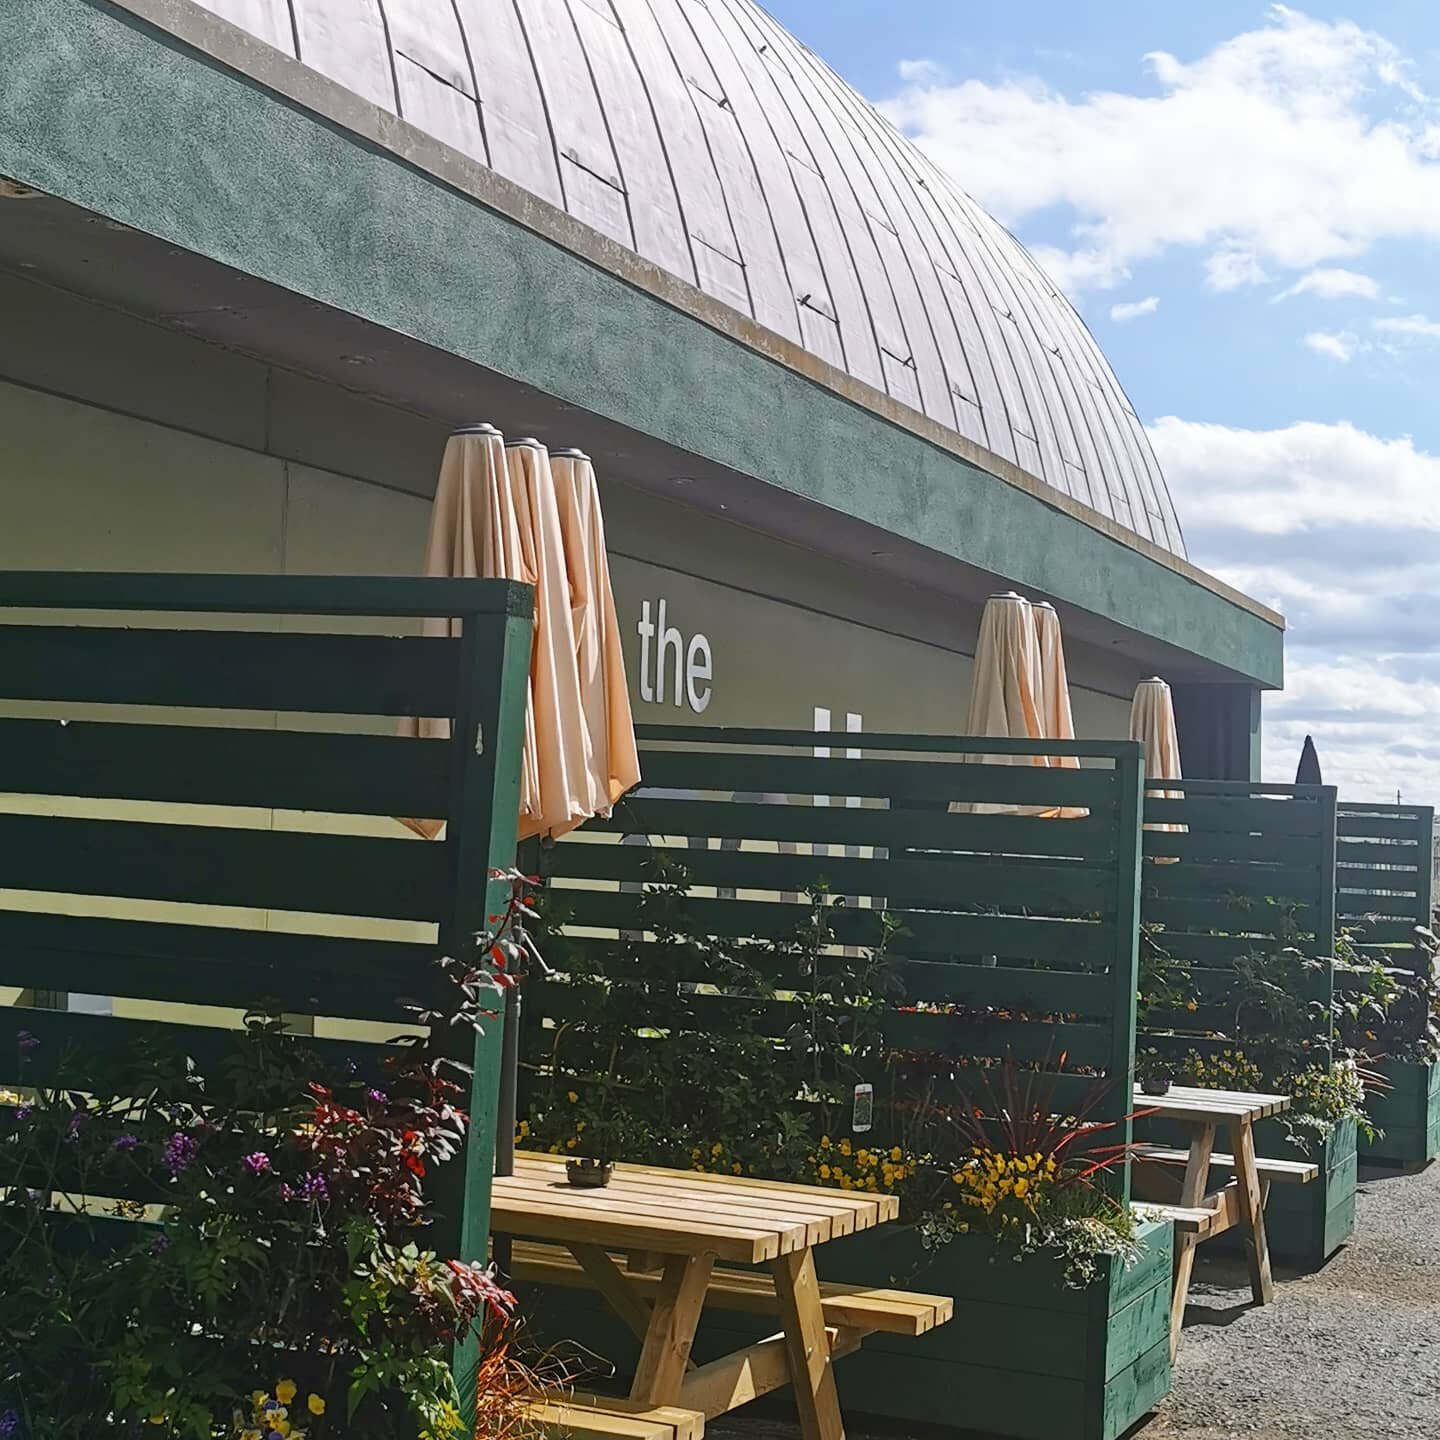 It's a lovely day to enjoy our outdoor area, come on over for some Friday drinks and delicious food! we're open and serving food until 8pm tonight!
🎉🎉🎉🎉🎉🎉🎉🎉🎉🎉🎉

#derry #derrybar #derrymenu #derryfood #derrynightlife #derrynews #derryfoodie